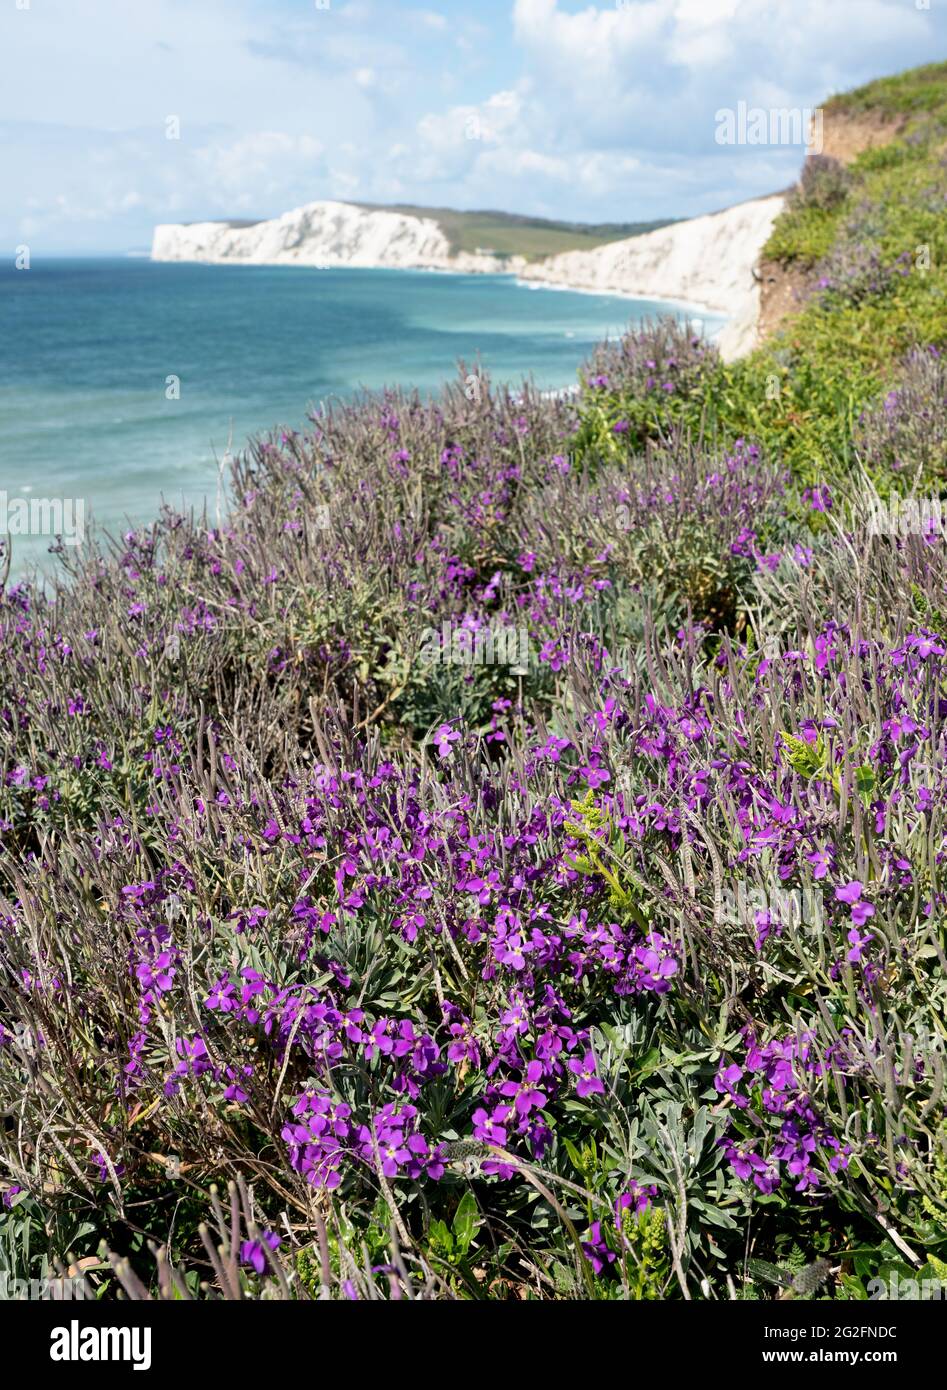 Vigorous growth of purple flowered Hoary Stock Matthiola incana on sea cliffs at Freshwater Bay on the Isle of Wight UK looking towards Tennyson Down Stock Photo